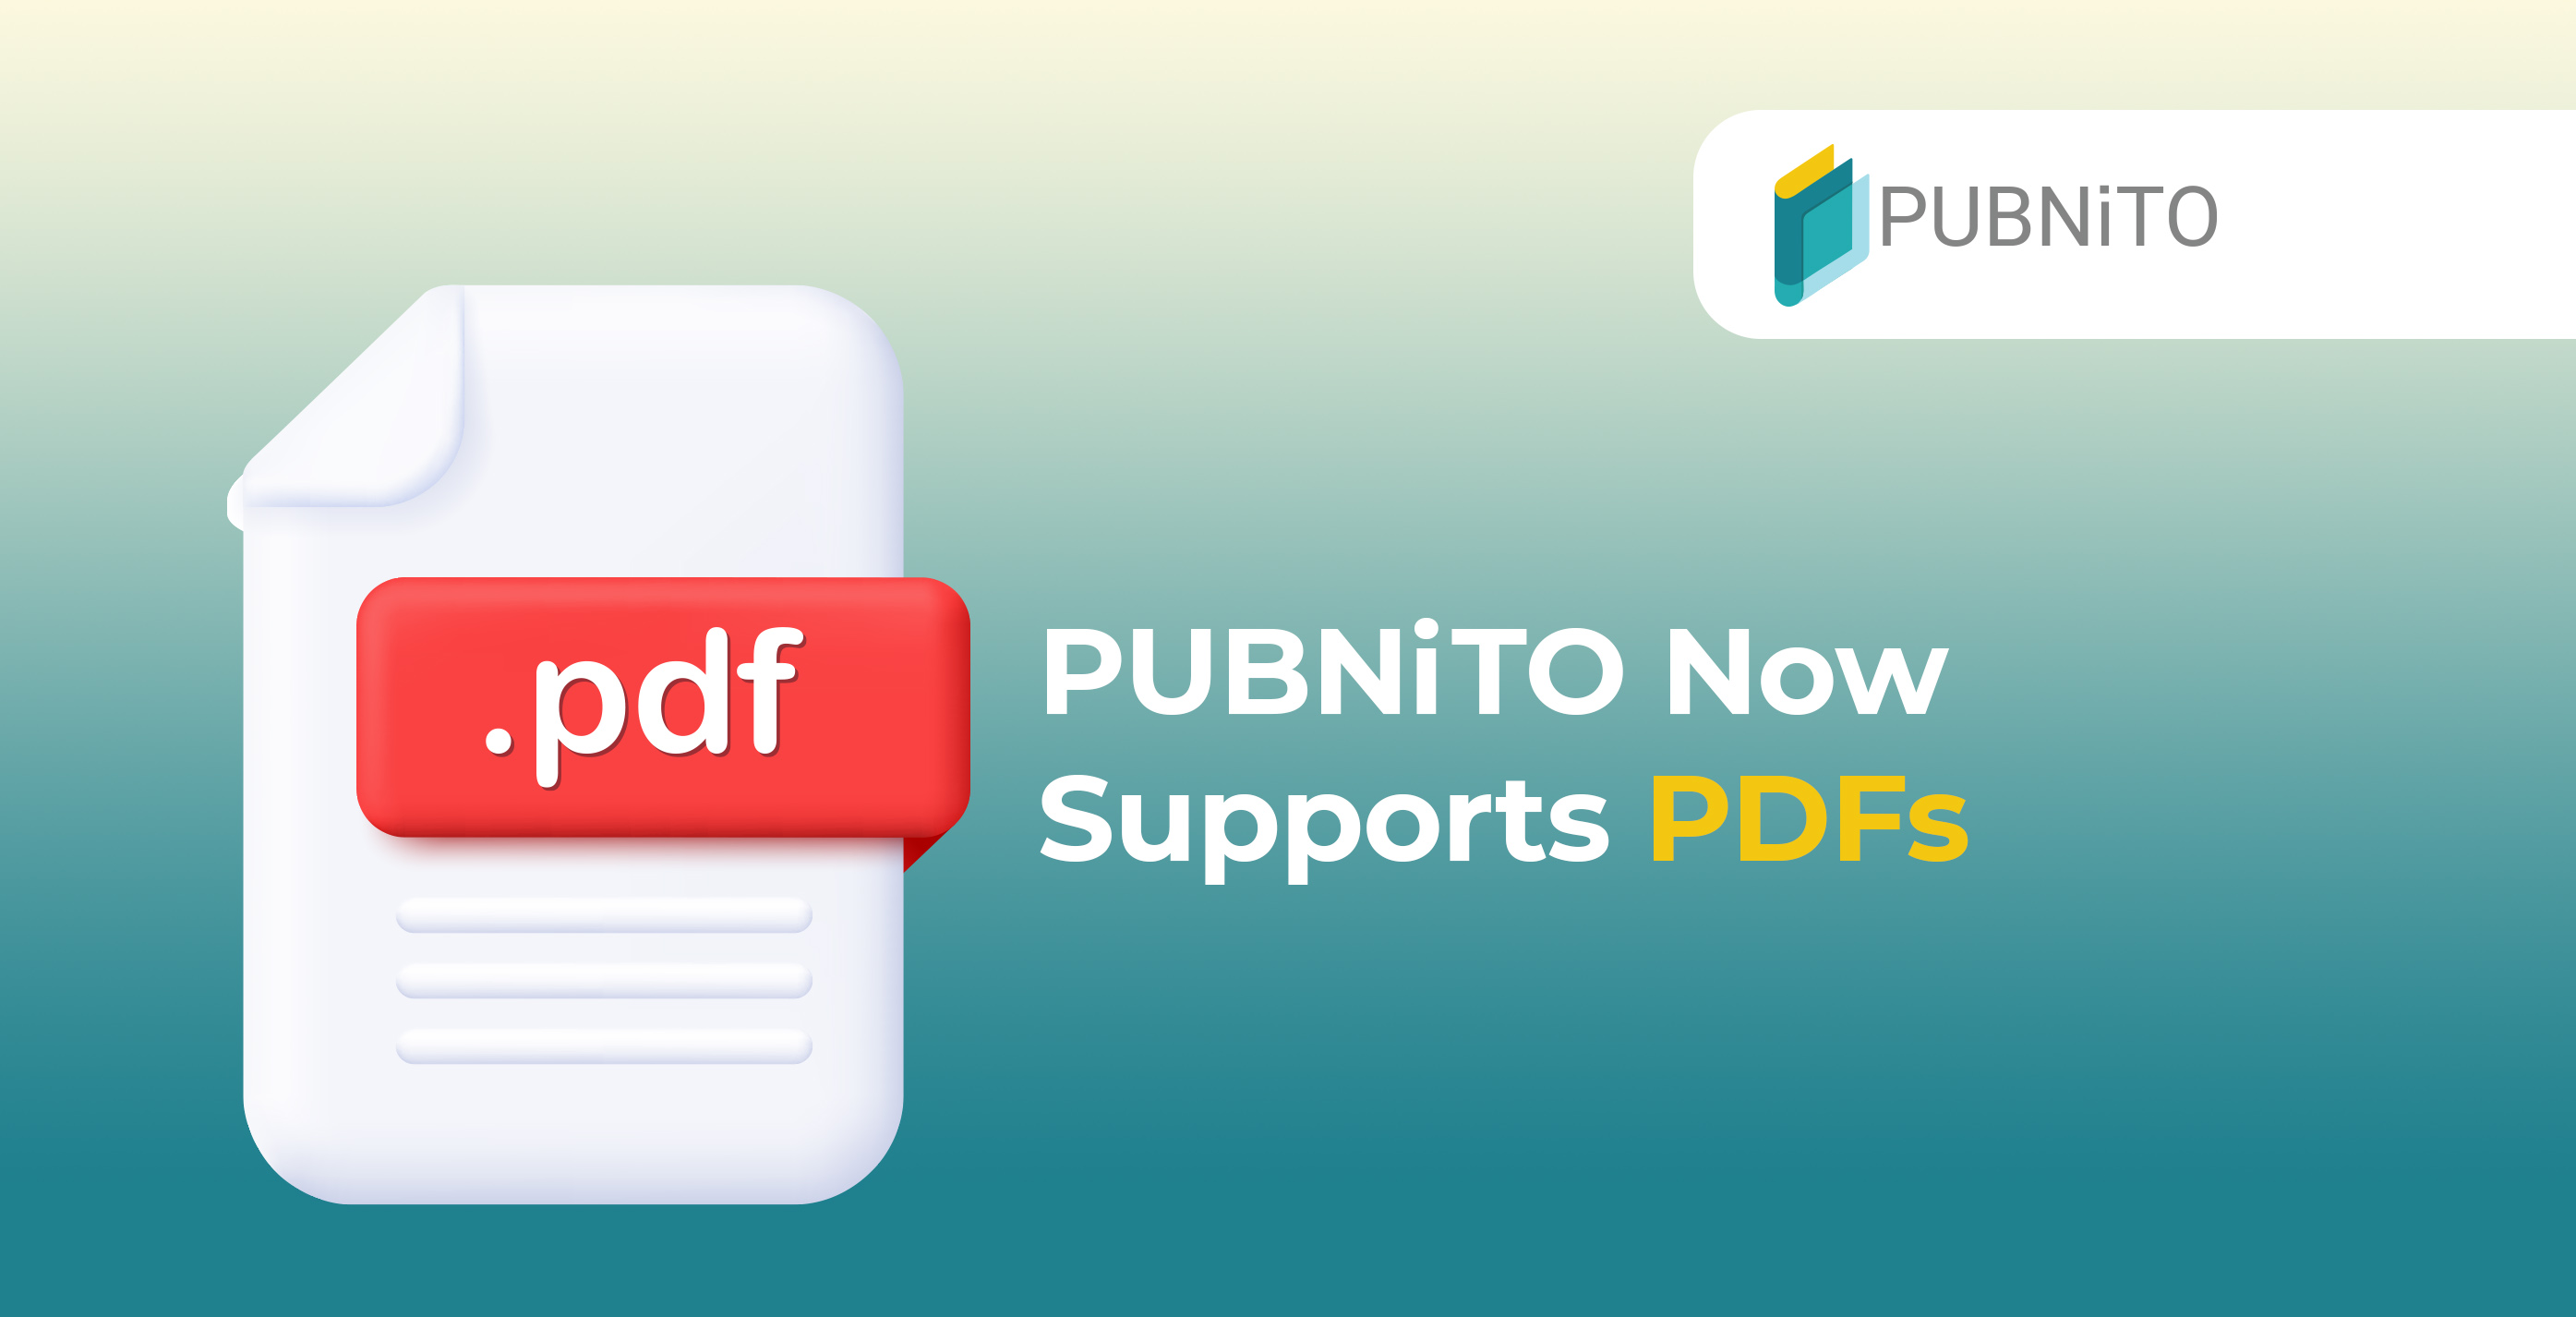 A PDF icon to show that PUBNiTO supports PDFs